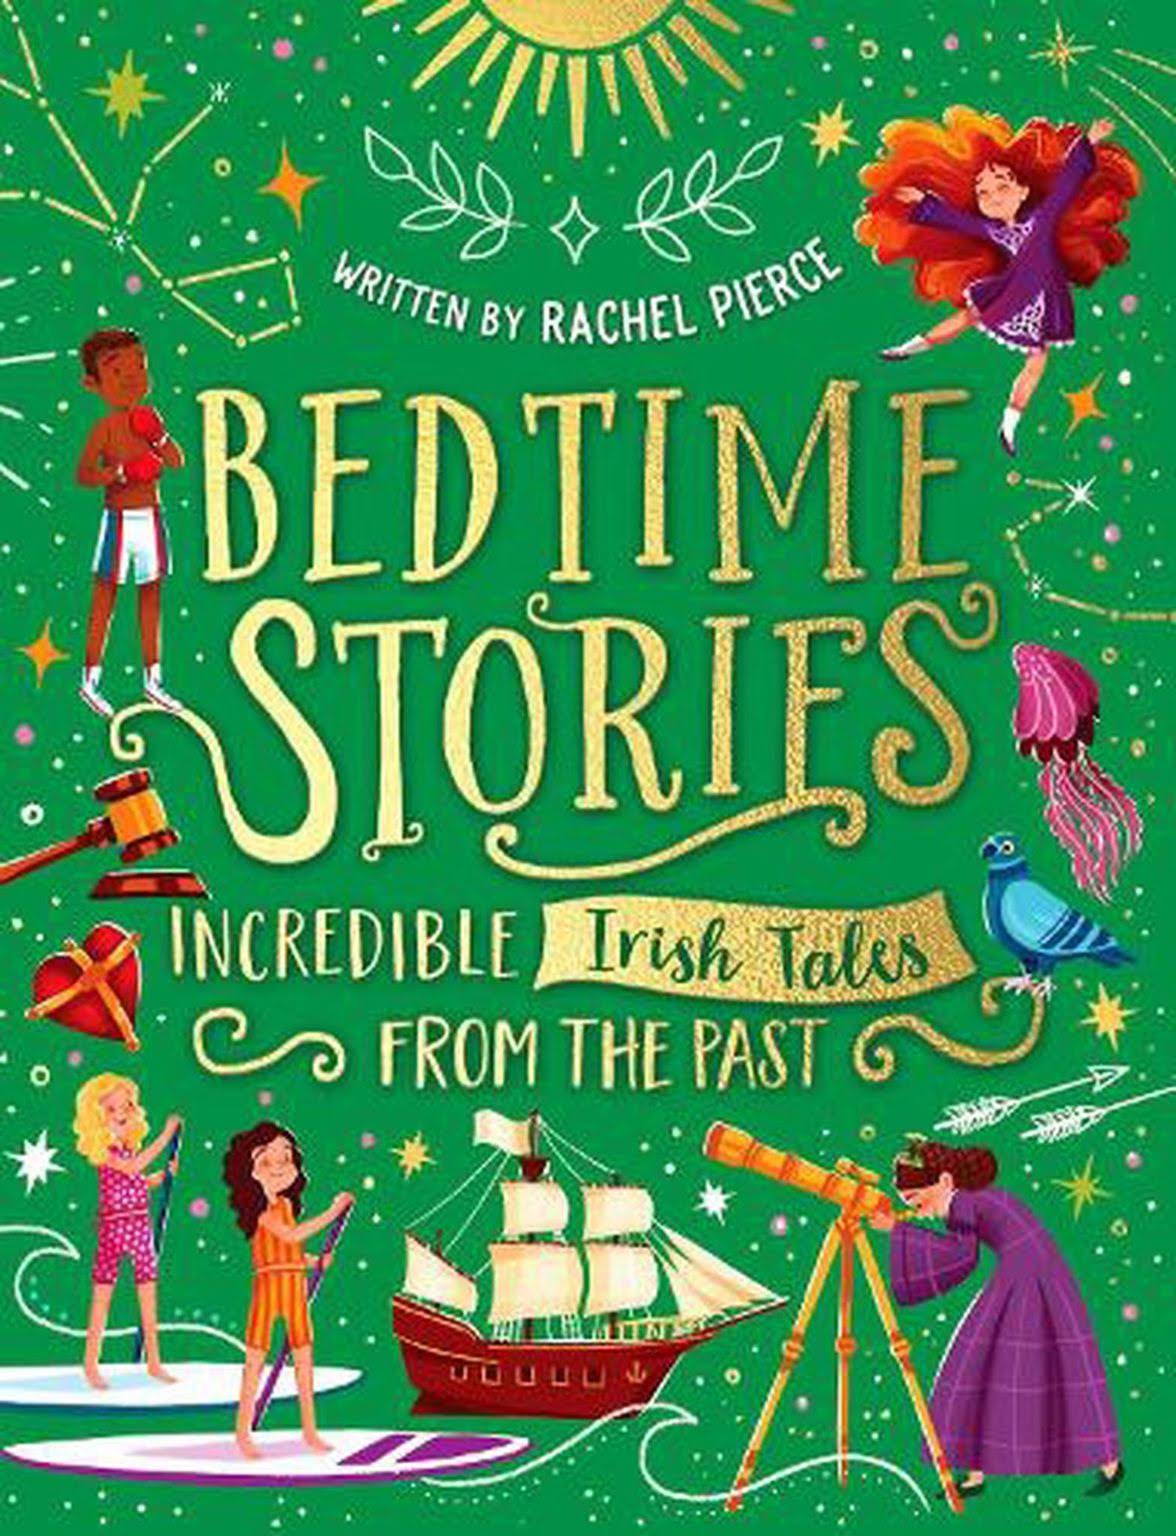 Bedtime Stories: Incredible Irish Tales from the Past [Book]